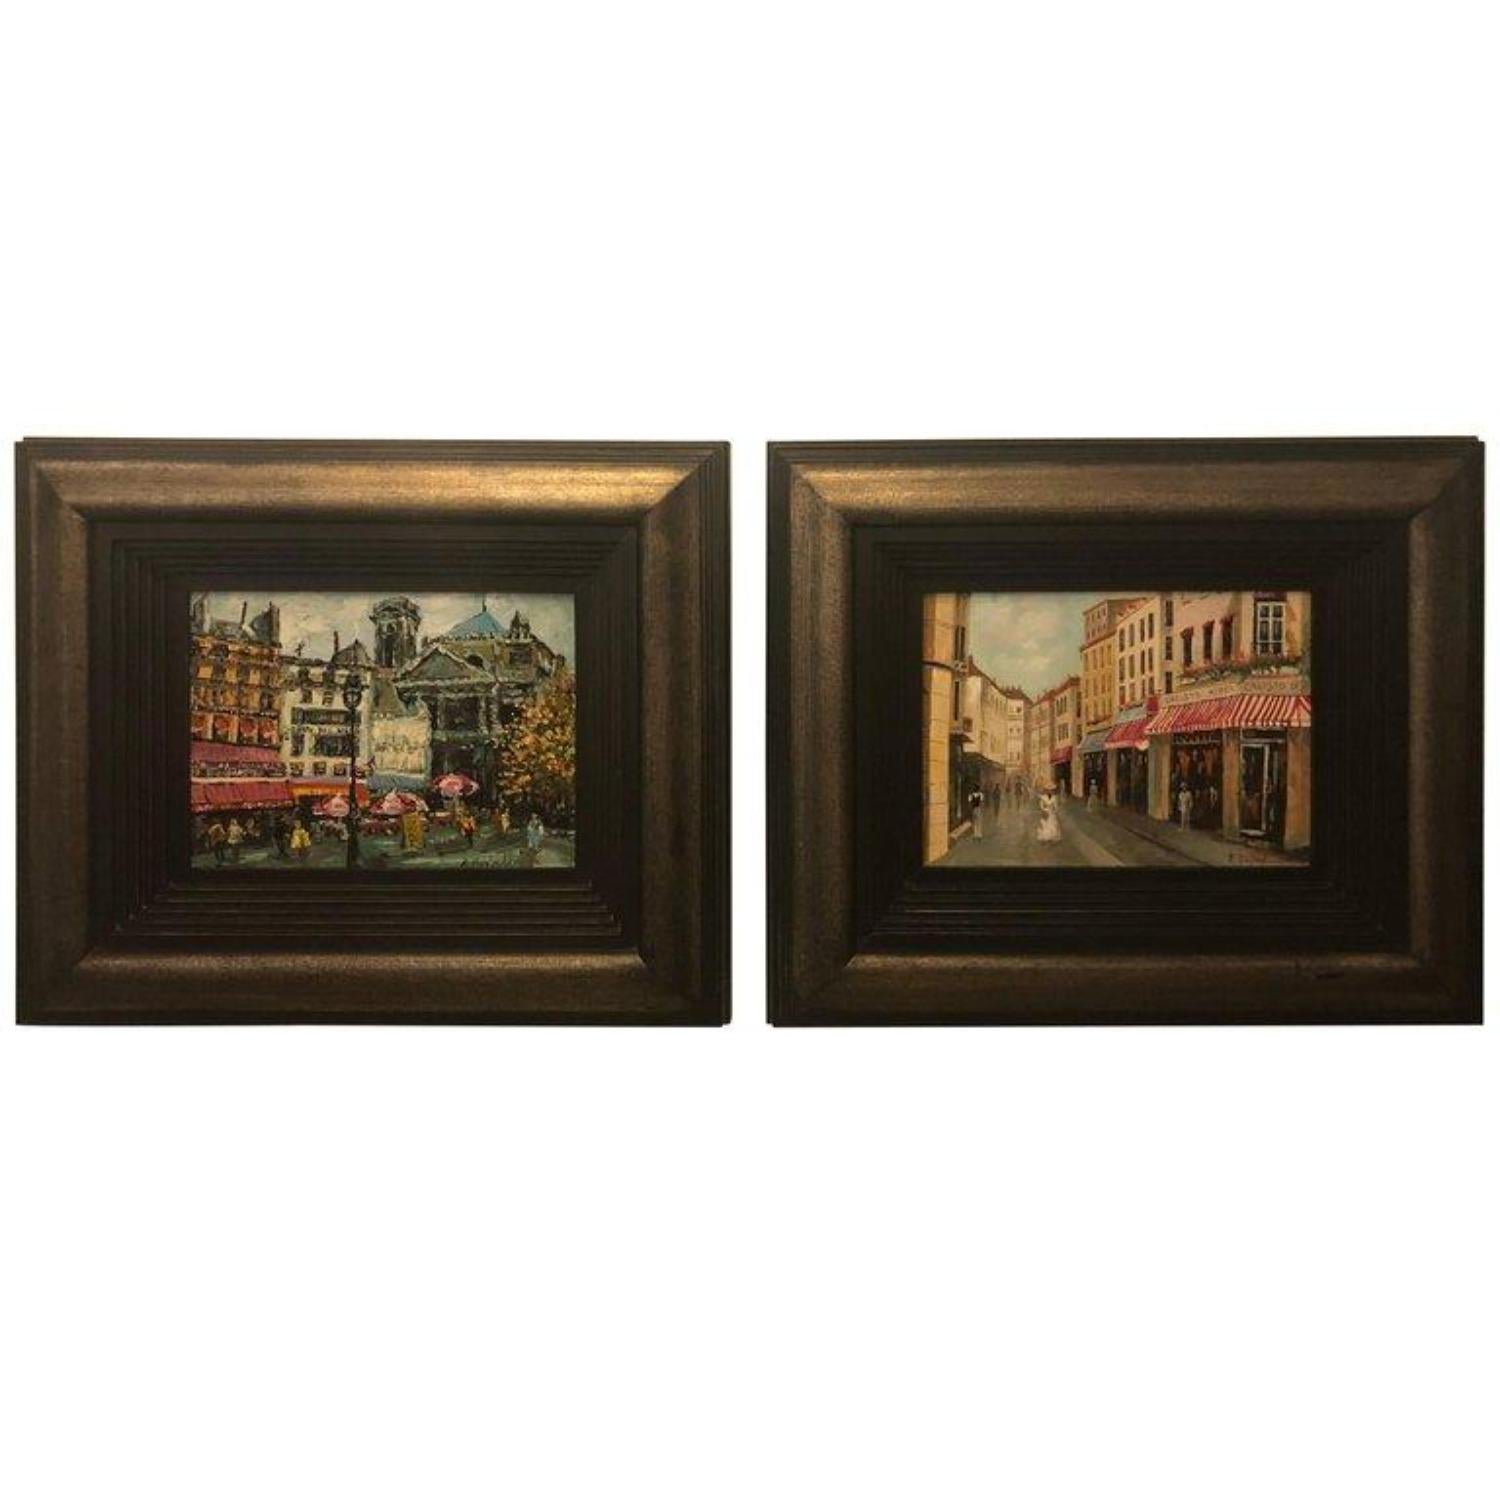 Parisian Street Scenes Oil on Canvas Painting Signed R. Roywilsens, a Pair 